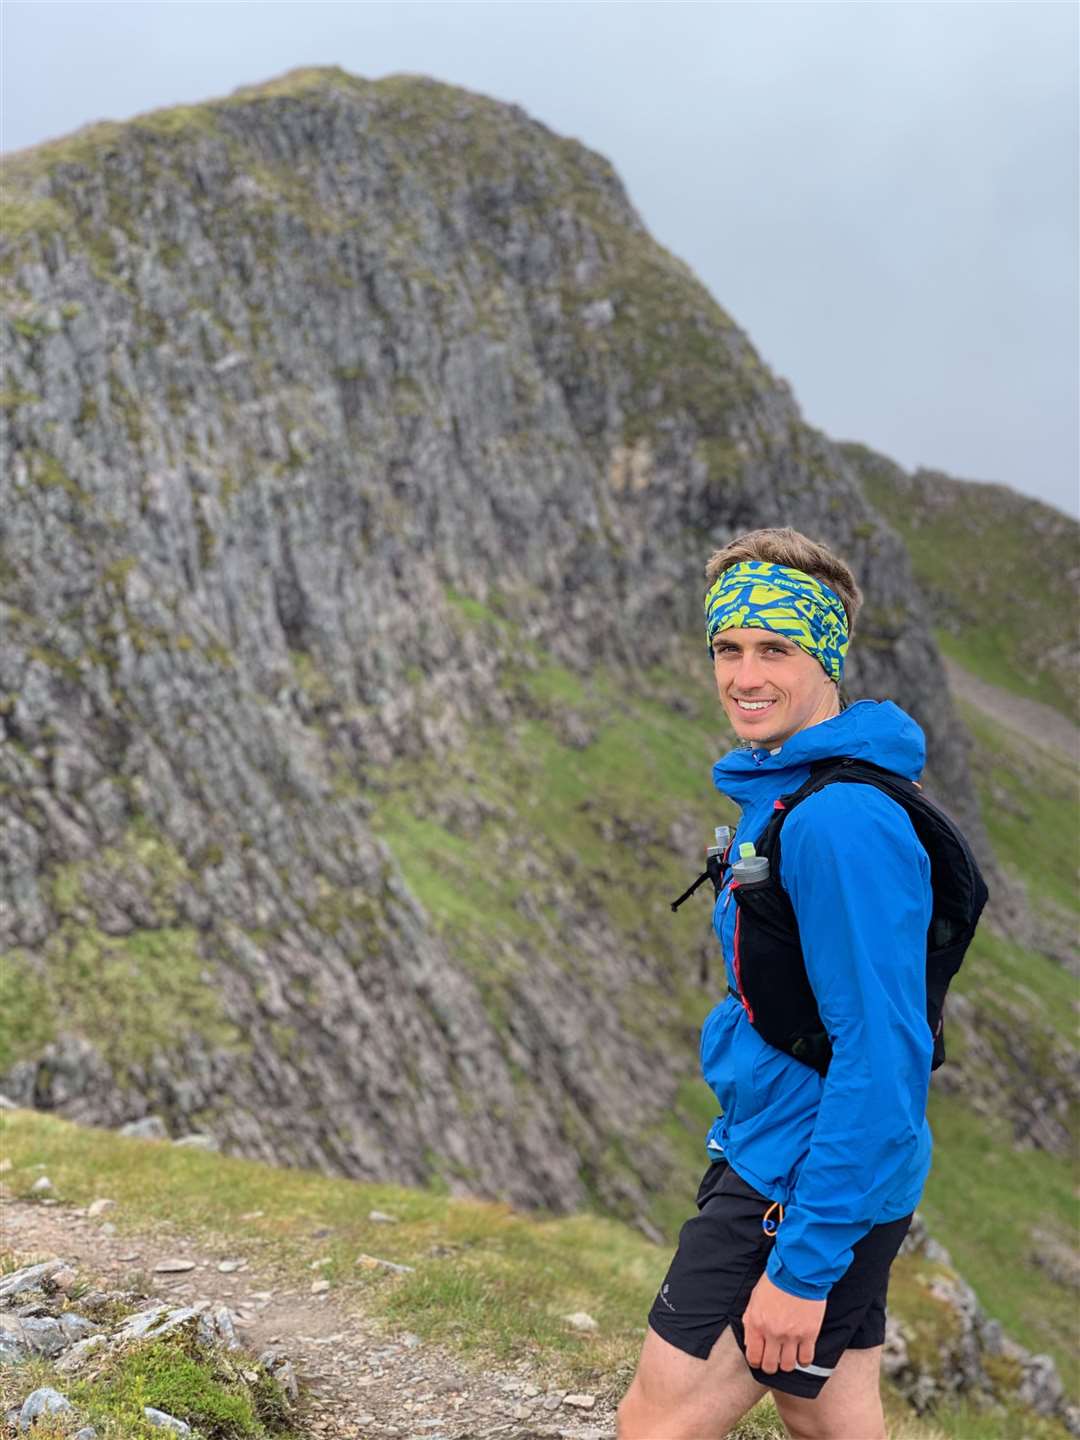 Ross Brannigan talks about his book, Running Adventures Scotland, on the Active Outdoors podcast.